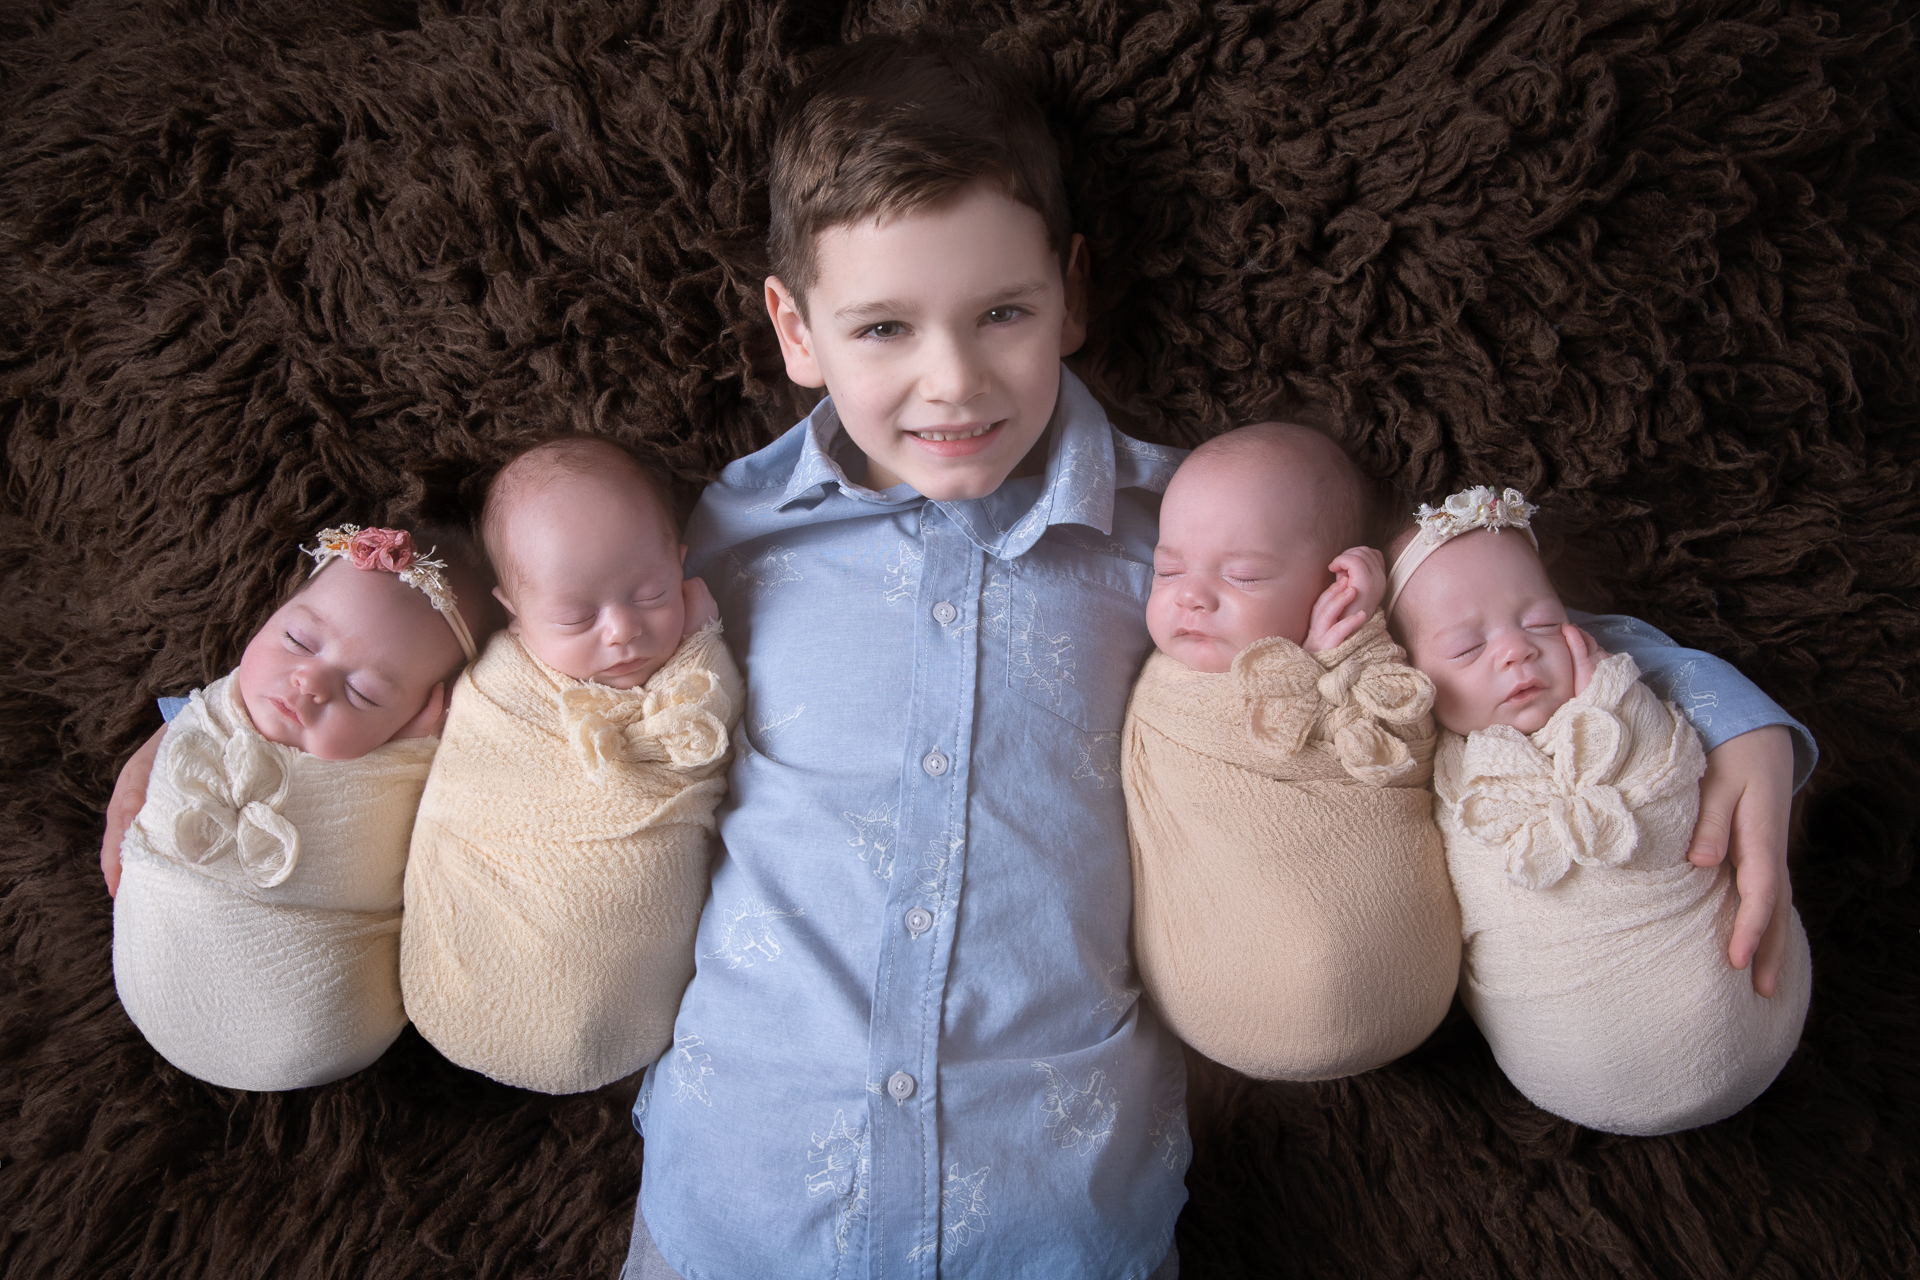 Big brother holds his 4 newborn siblings. Two babies on each side. Dark brown carpet as background.